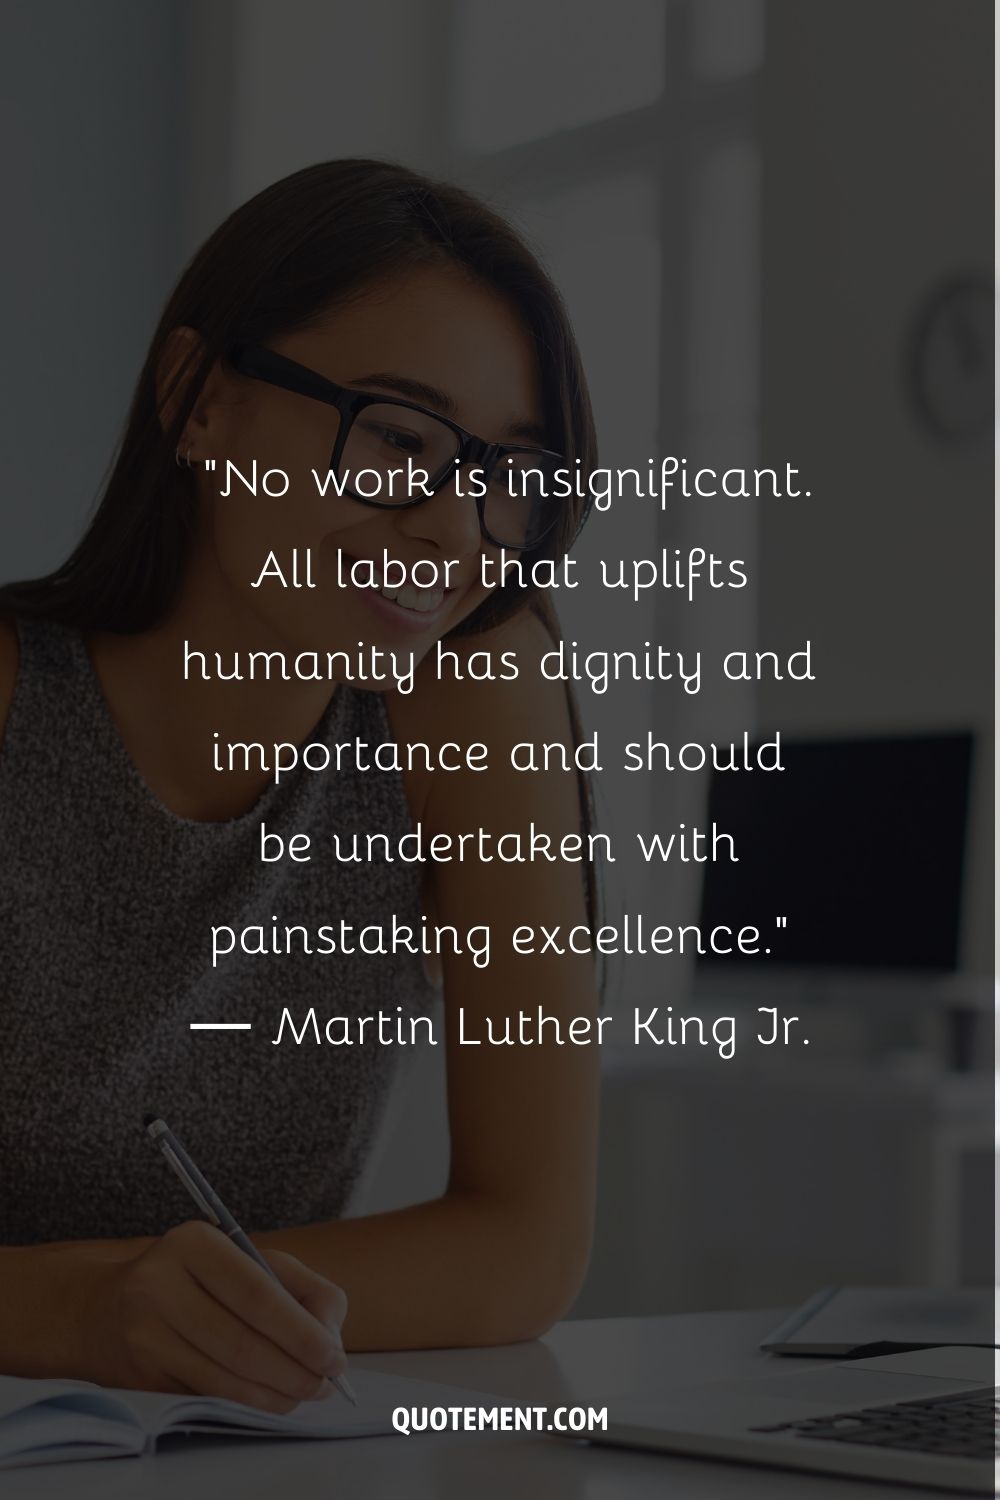 “No work is insignificant. All labor that uplifts humanity has dignity and importance and should be undertaken with painstaking excellence.” ― Martin Luther King Jr.